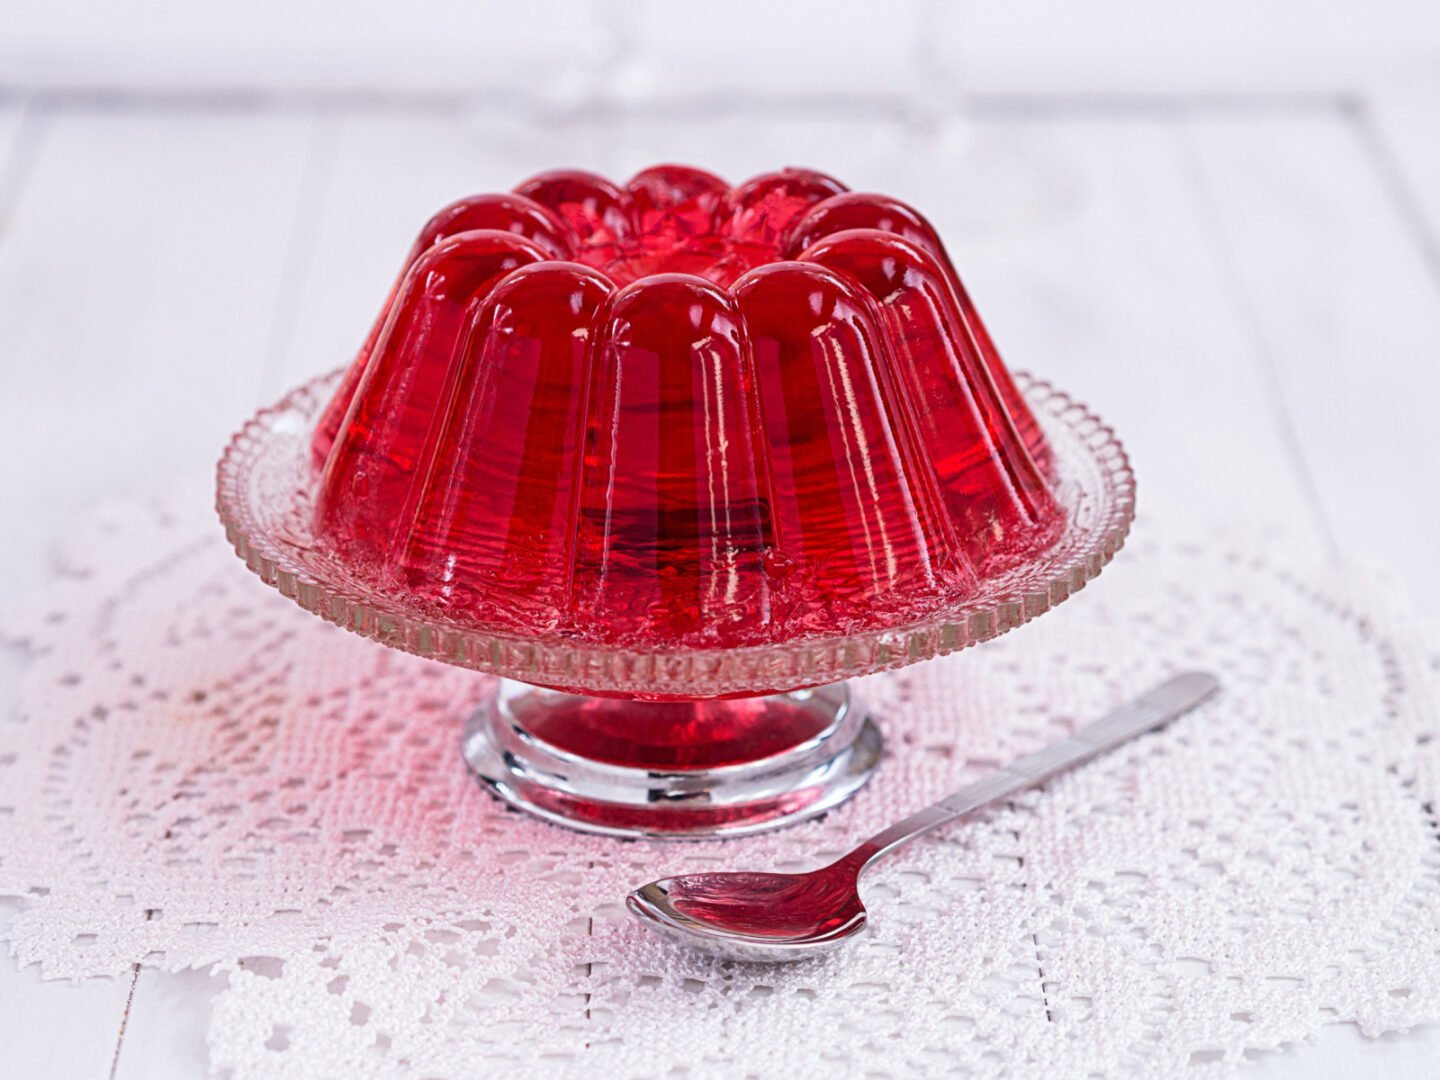 red jello jelly on a raised tray